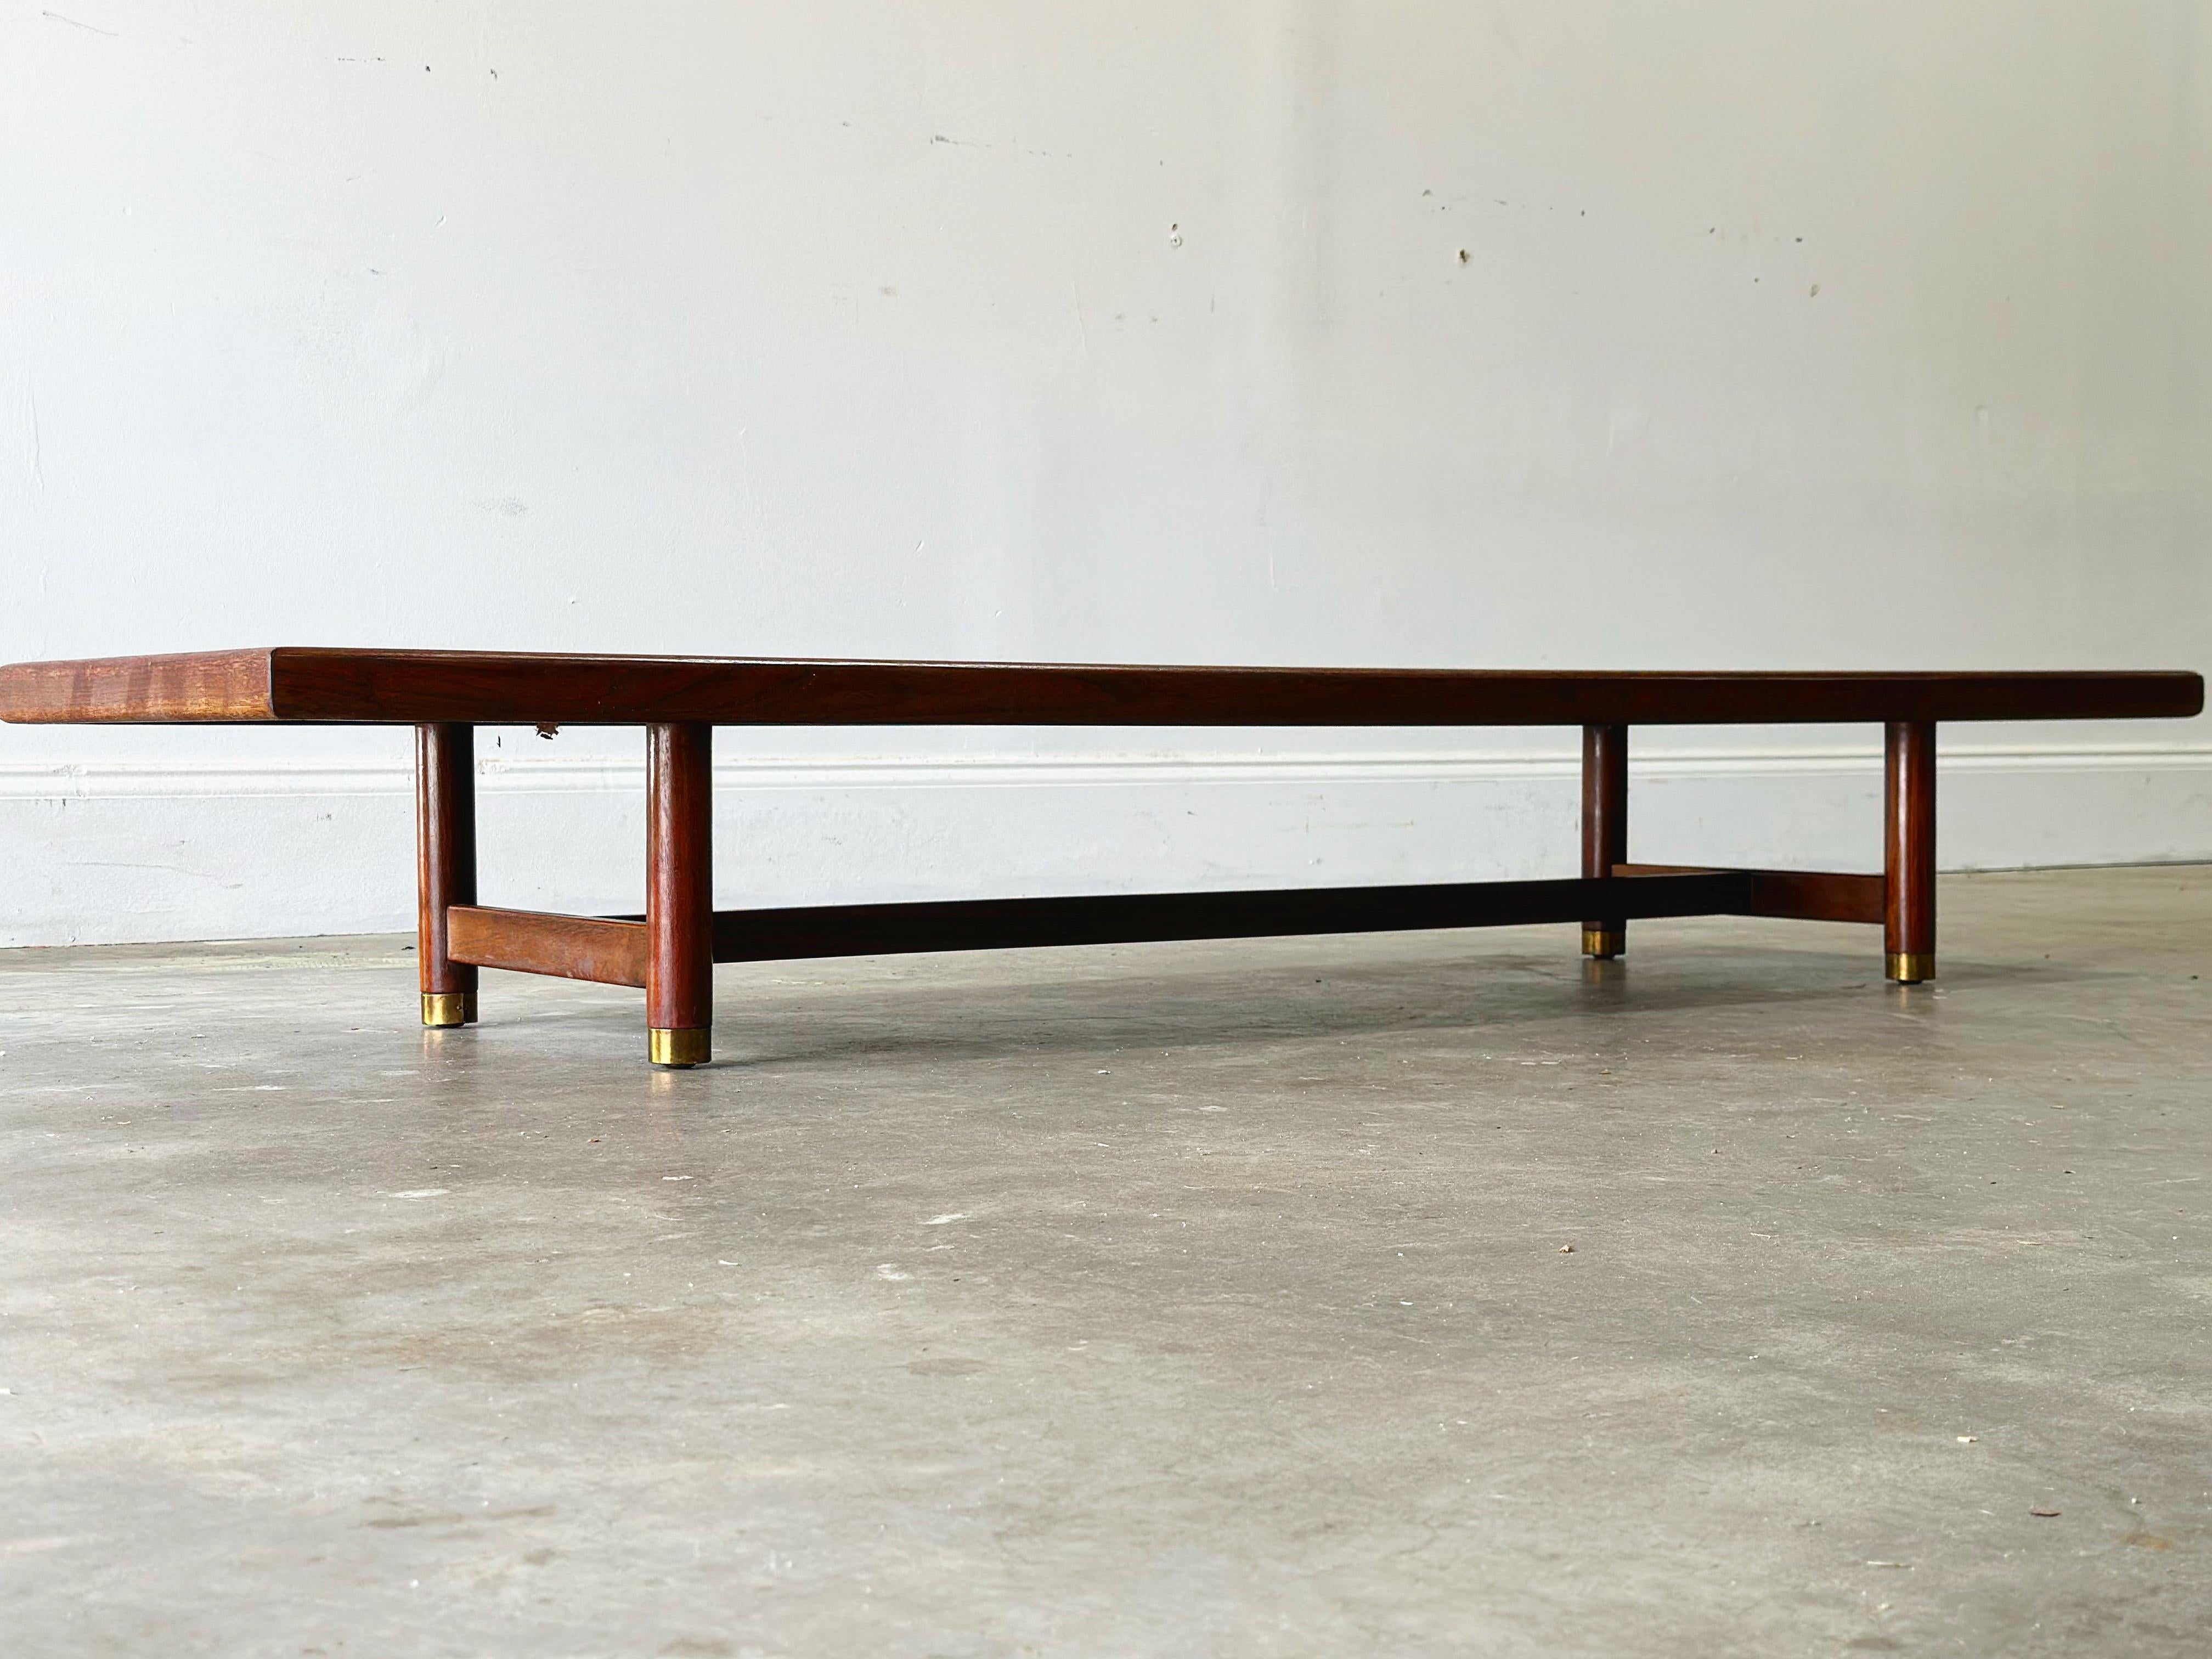 American Midcentury Low Long Coffee Table or Bench, Walnut + Brass - Gordon's For Sale